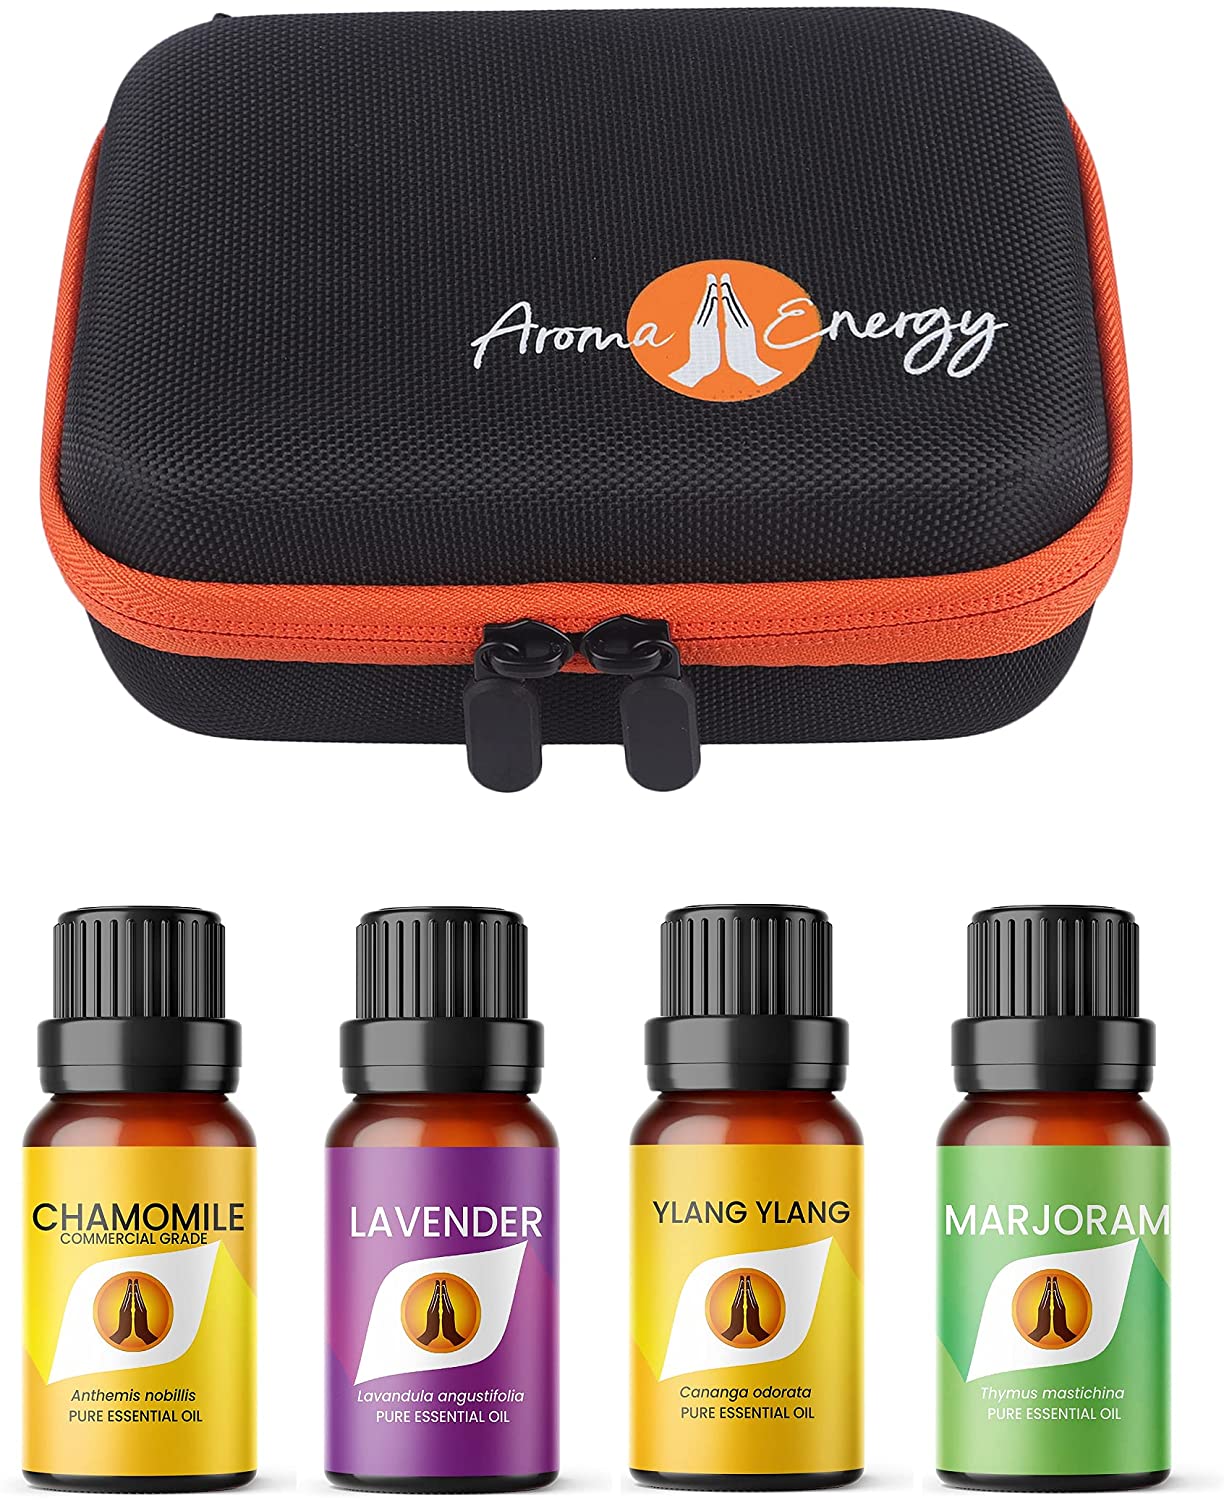 Essential Oil Gift Set Travel Case with pack of 4 x 10ml Sleep Essential Oils  - Chamomile, Lavender, Ylang Ylang, Marjoram - Aroma Energy